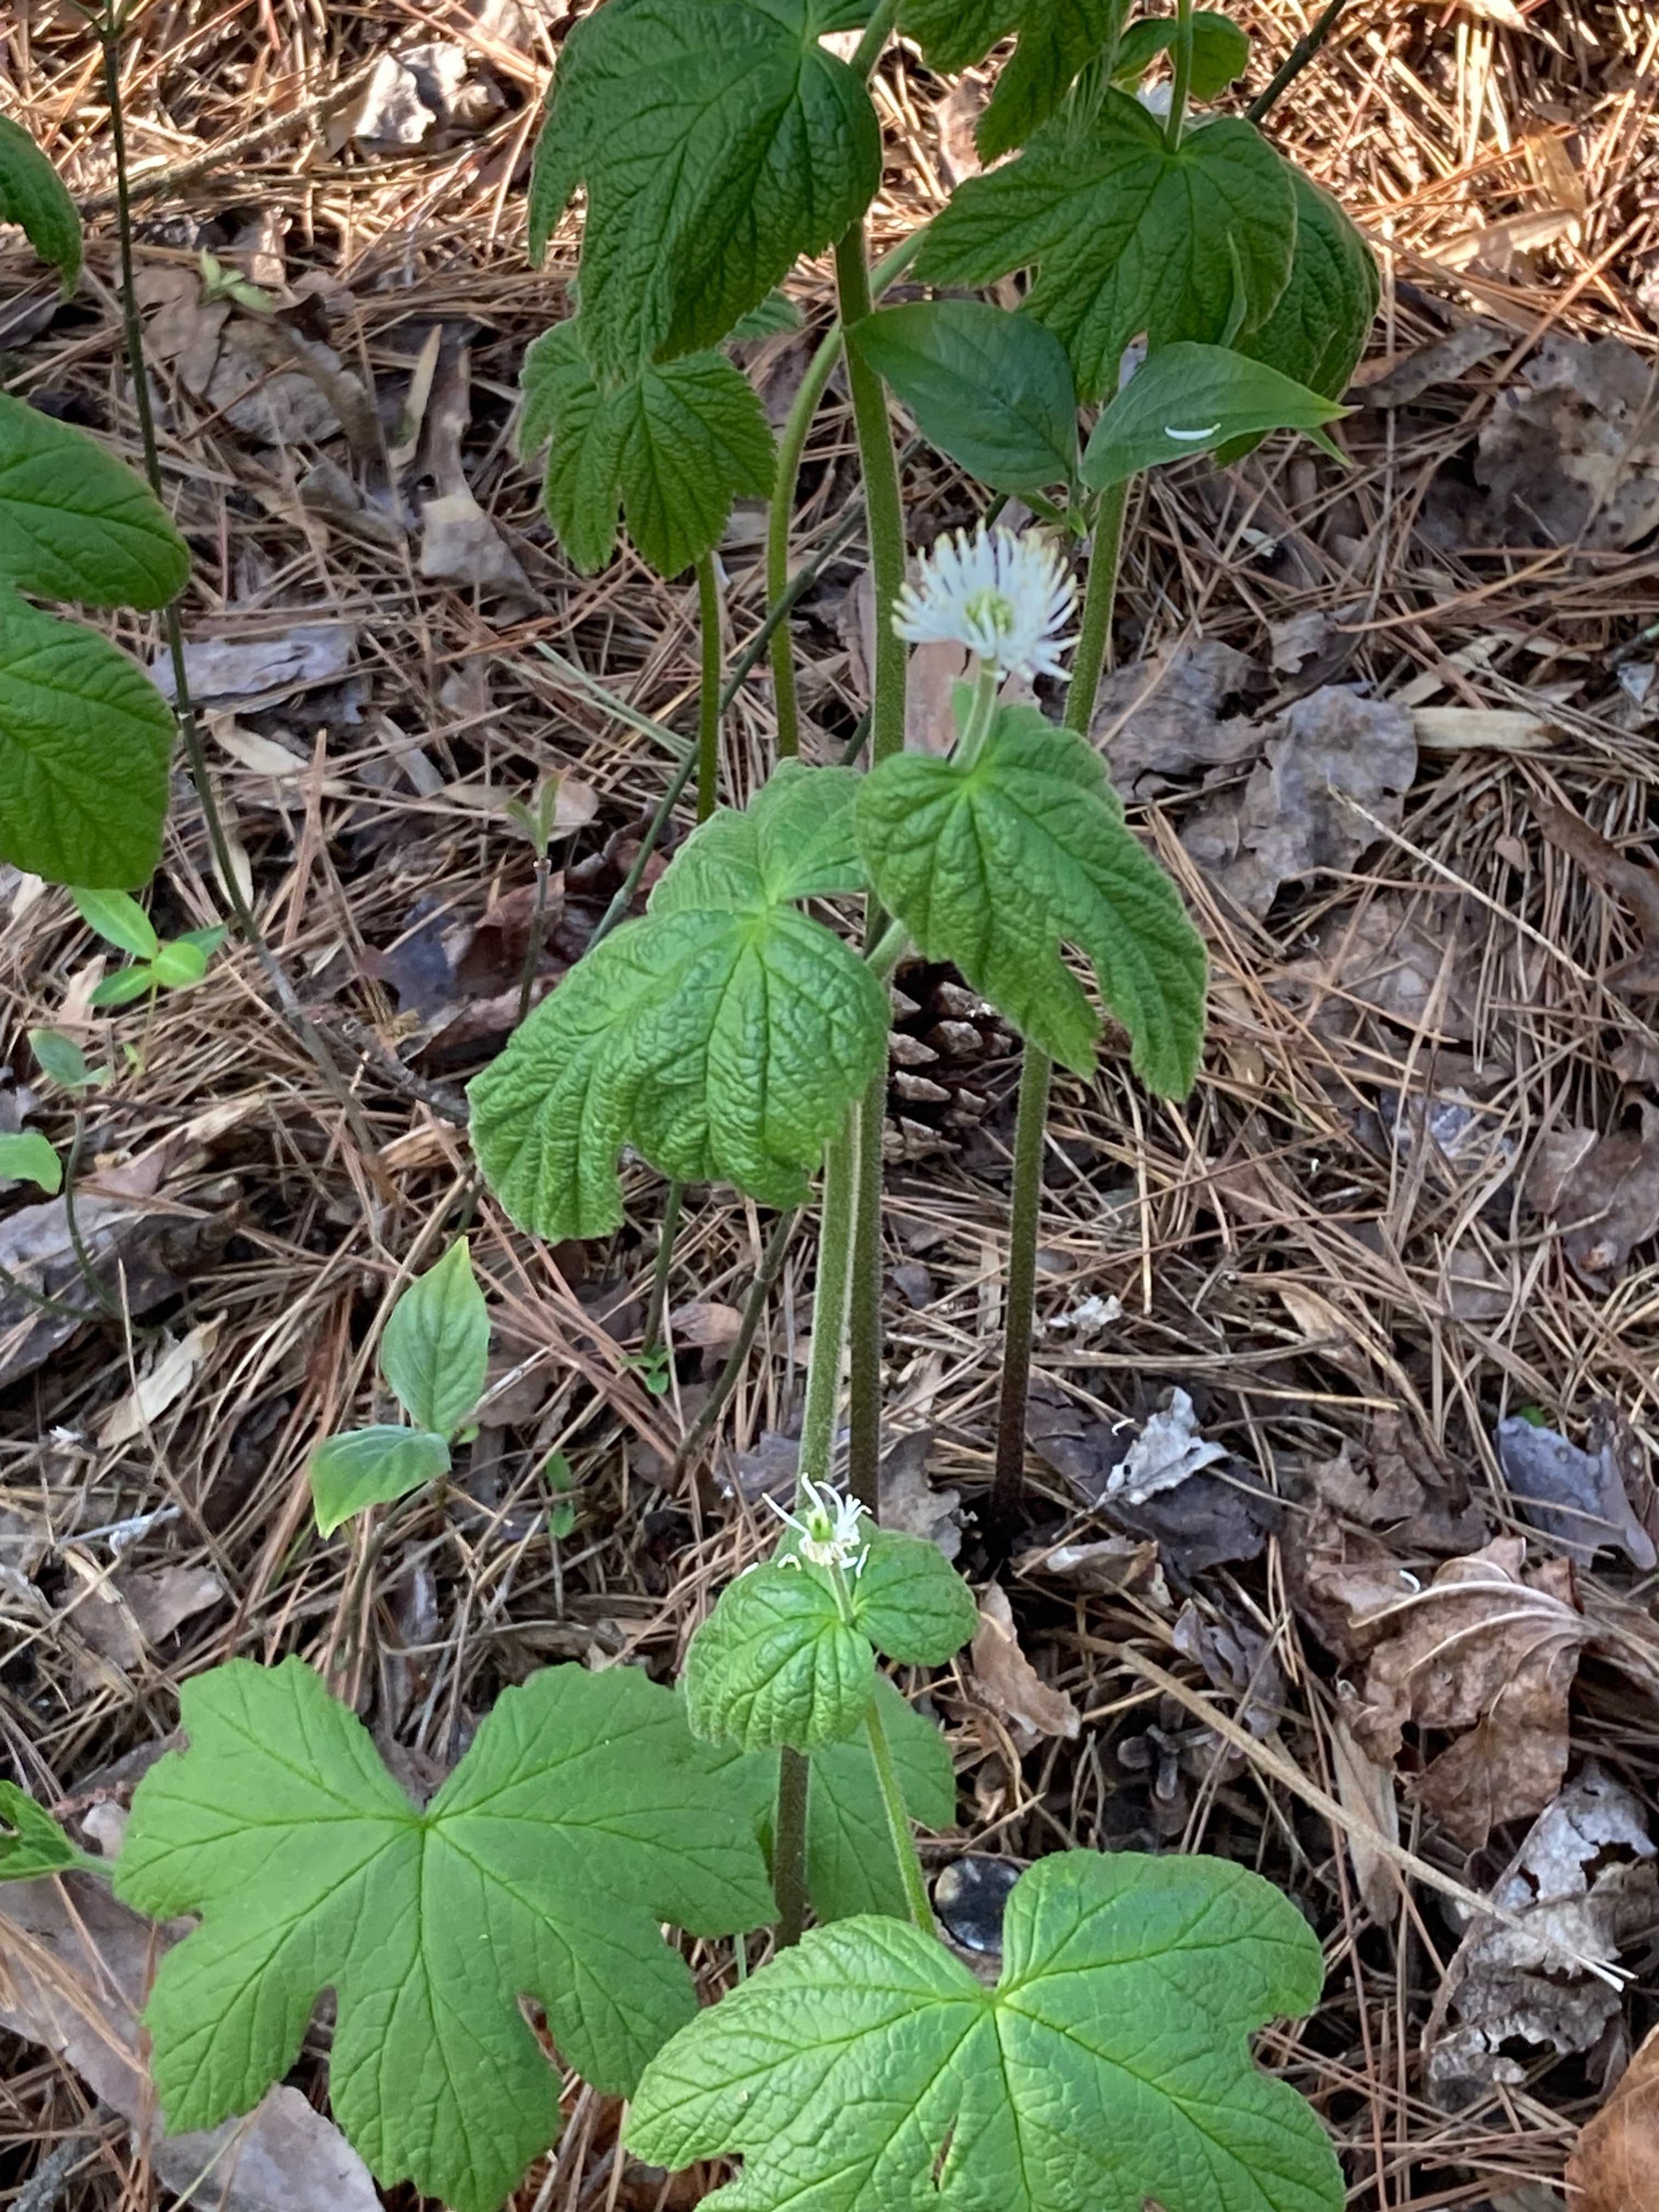 The Scientific Name is Hydrastis canadensis. You will likely hear them called Goldenseal. This picture shows the Grows to 10-15